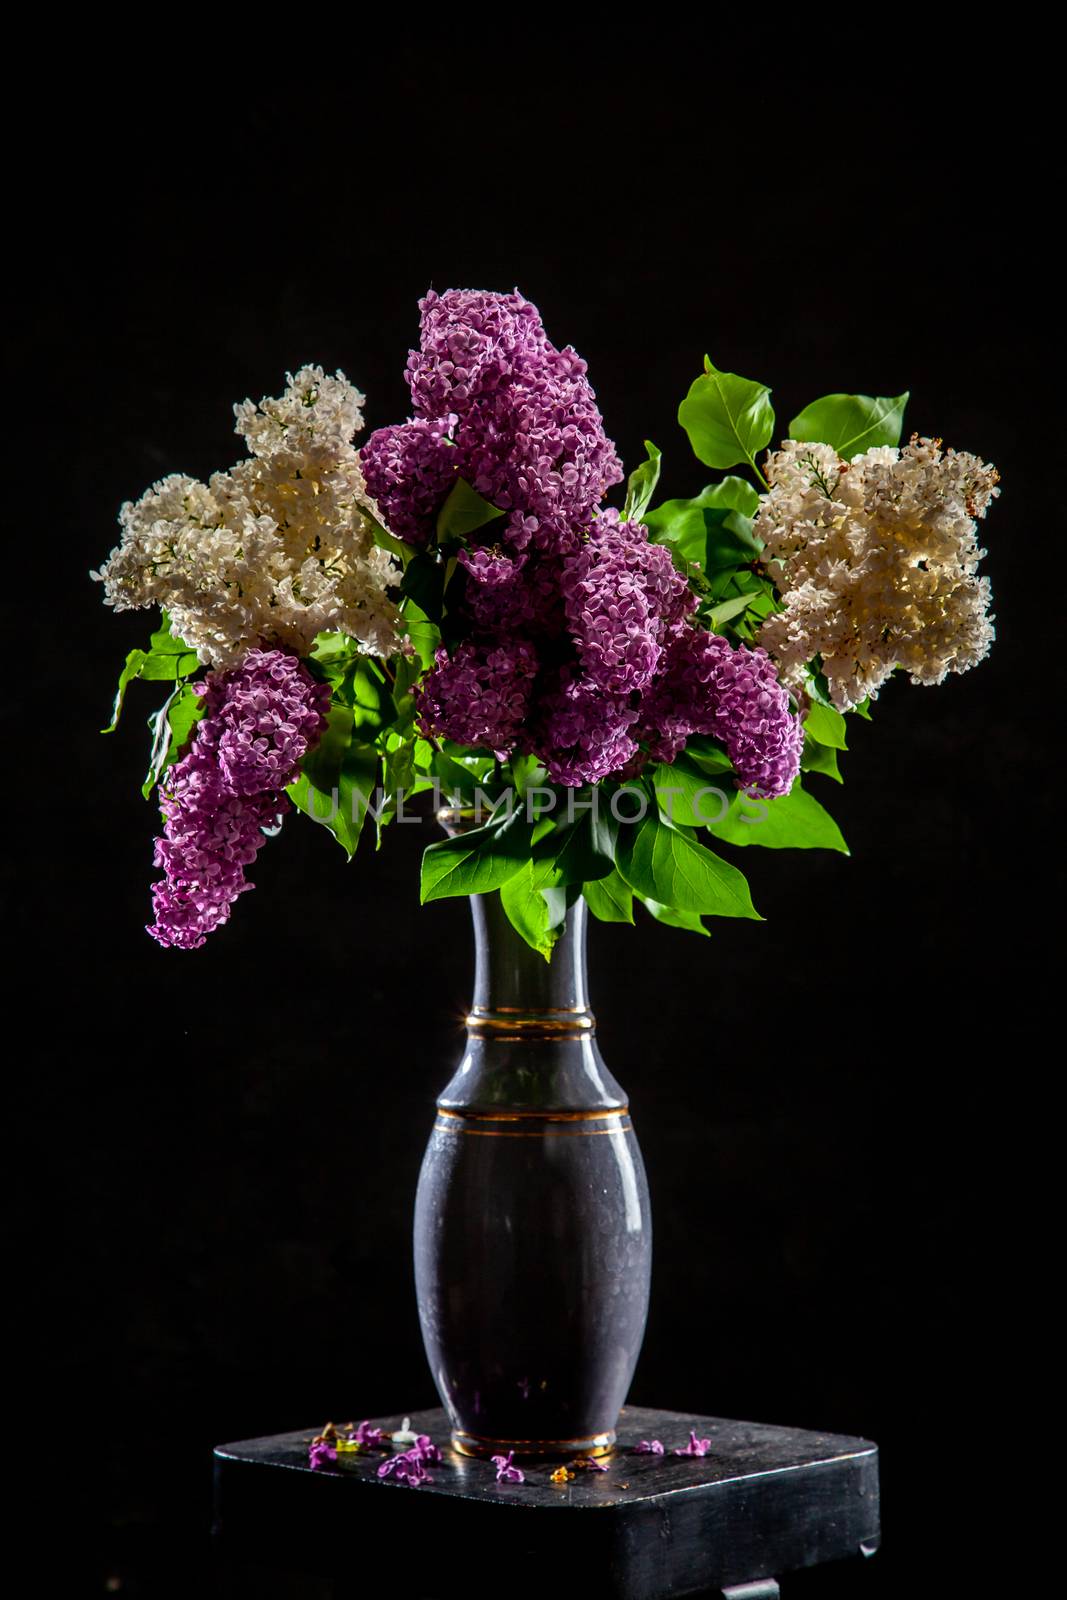 Lilac in vase on the black background by fotorobs